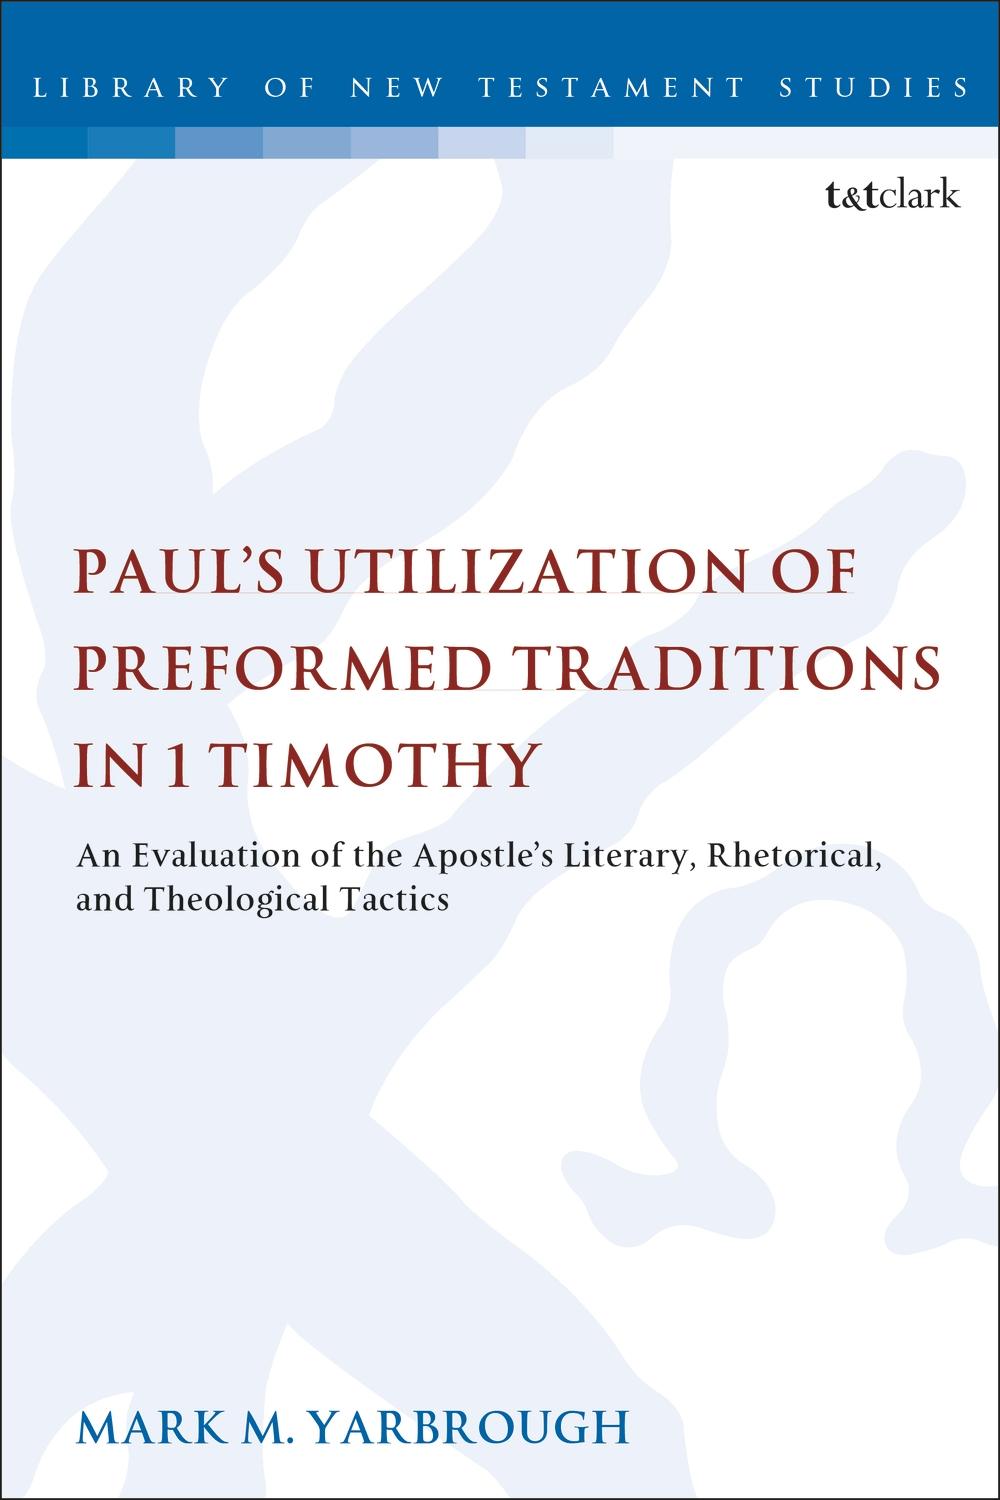 Paul's Utilization of Preformed Traditions in 1 Timothy - Mark M Yarbrough